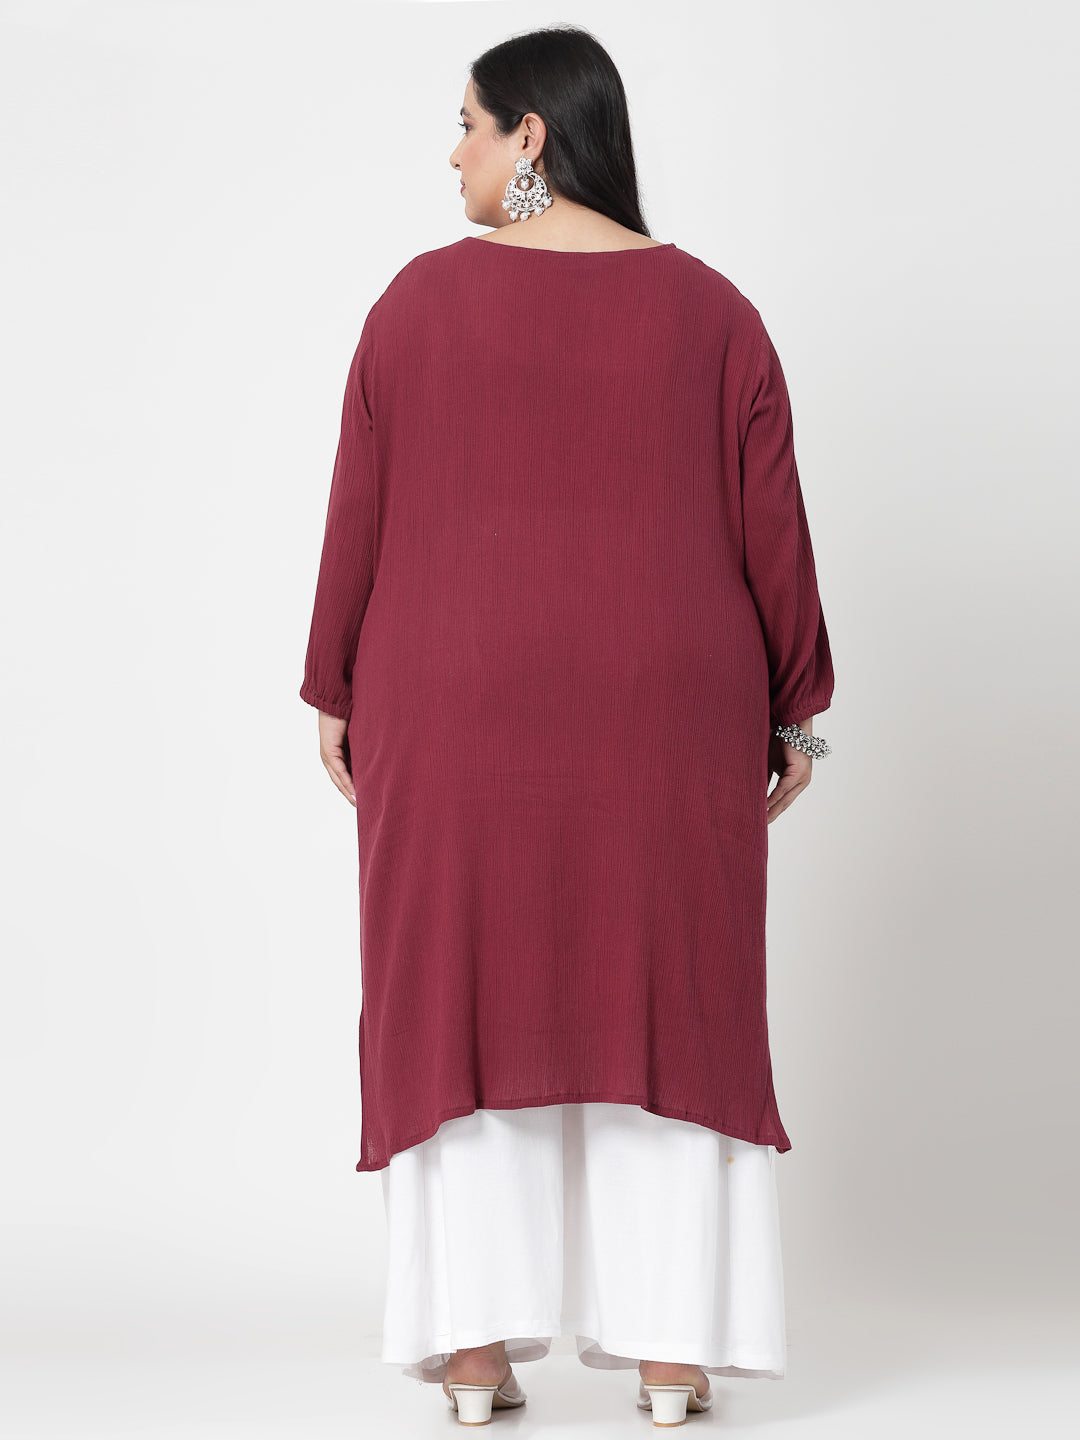 Women Plus Size Maroon Kurta With Embroidered Front - Kashyap Global Lifestyles LLP